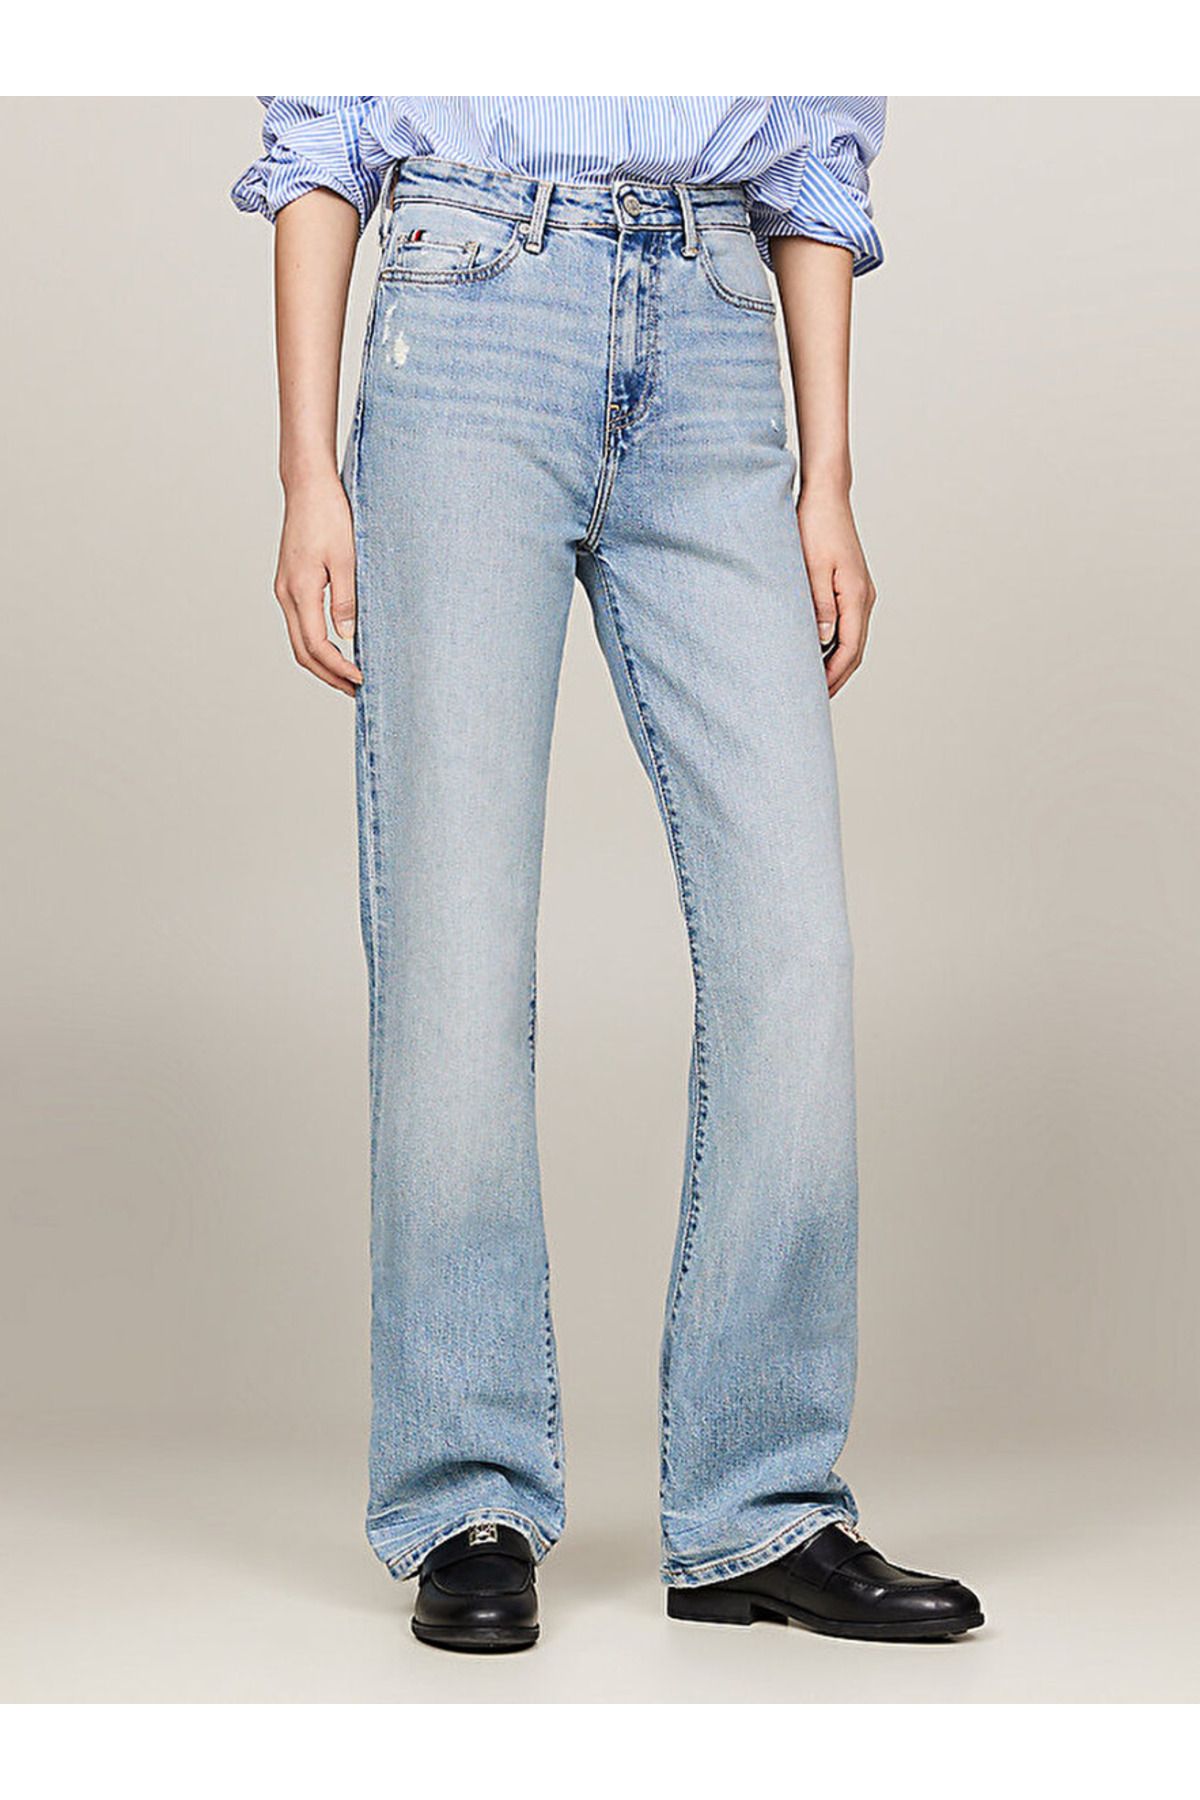 Tommy Hilfiger High Rise Bootcut Distressed Jeans